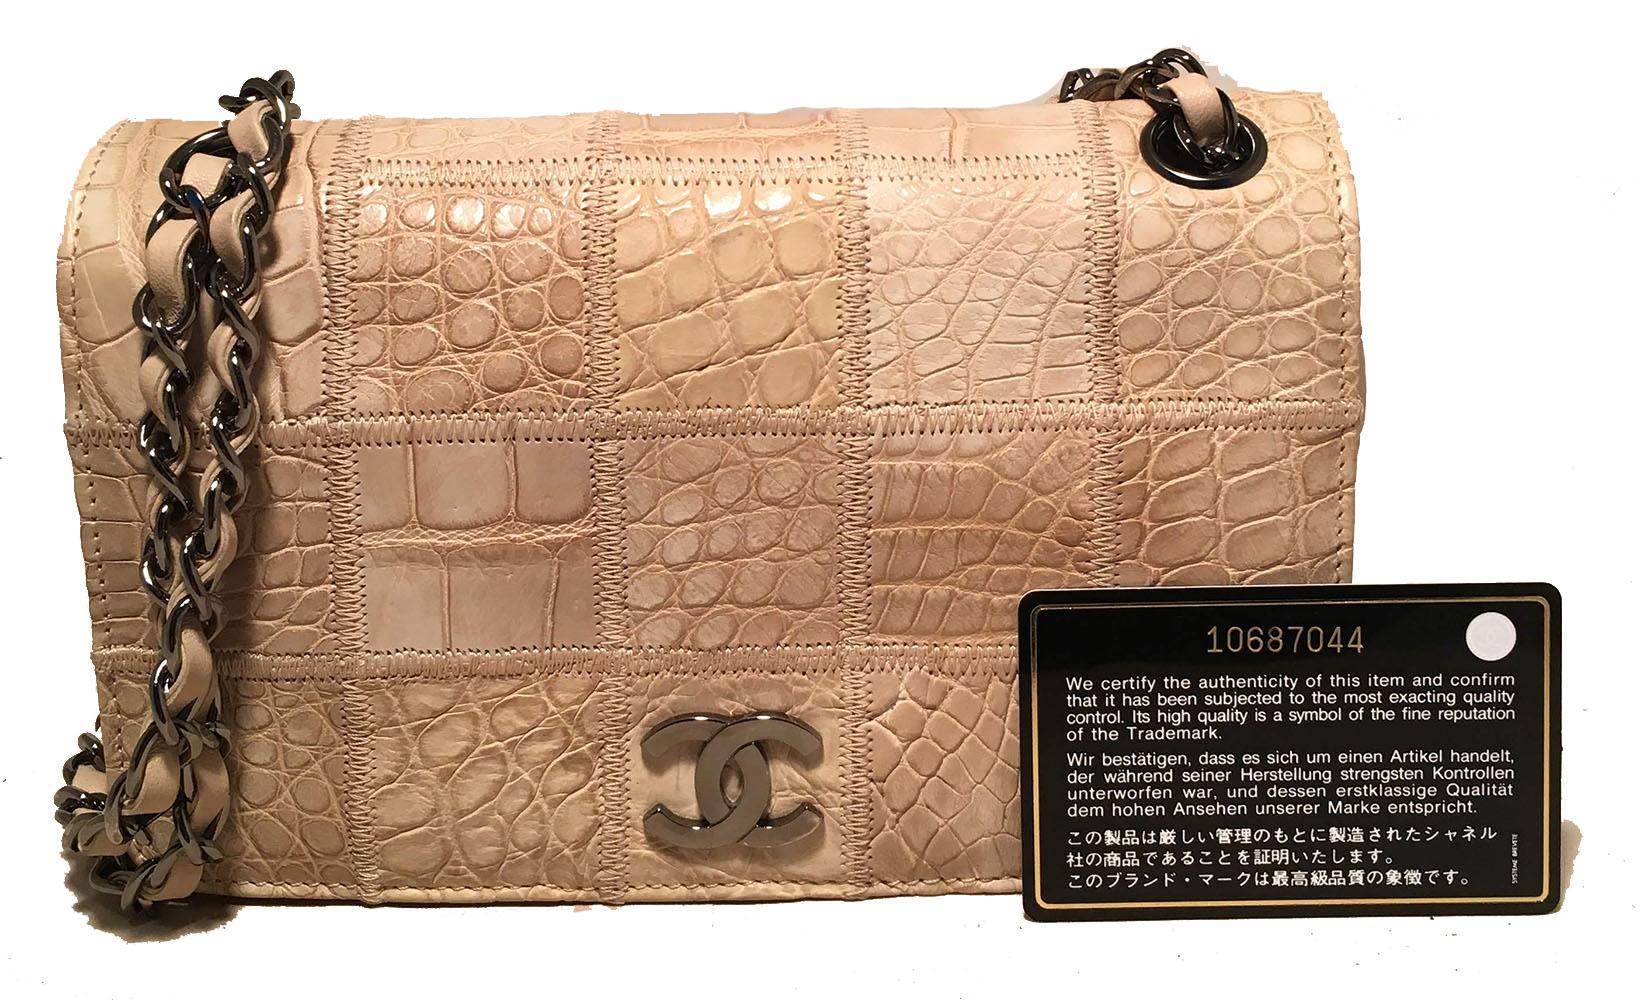 RARE Chanel Natural Beige Crocodile Quilted Classic Flap Shoulder Bag 6